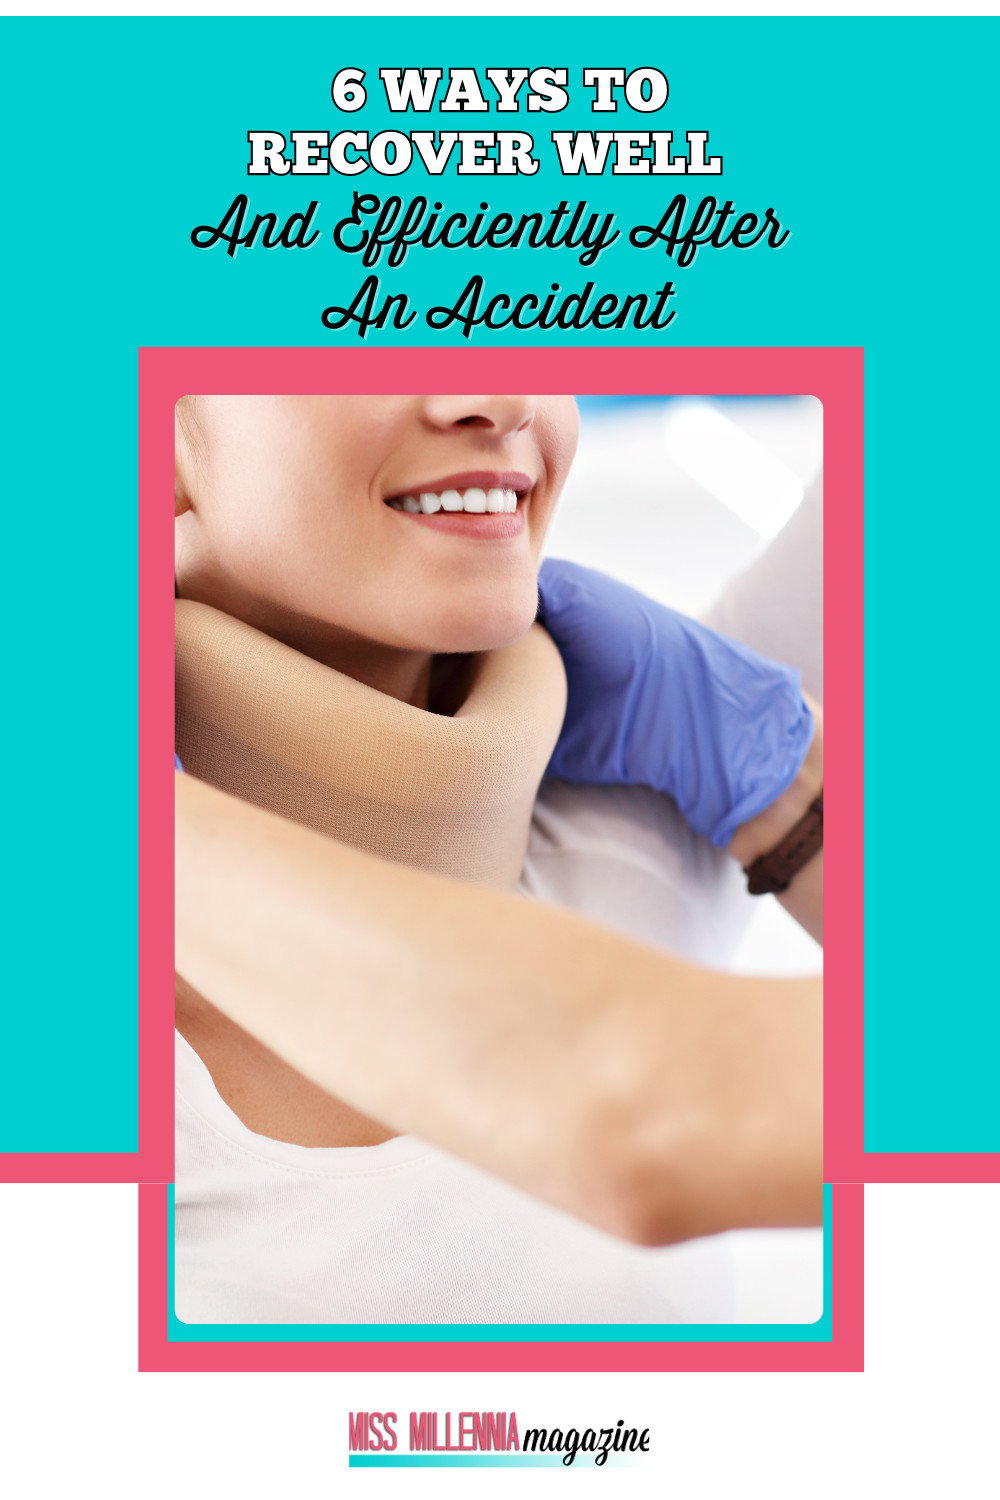 6 Ways To Recover Well And Efficiently After An Accident